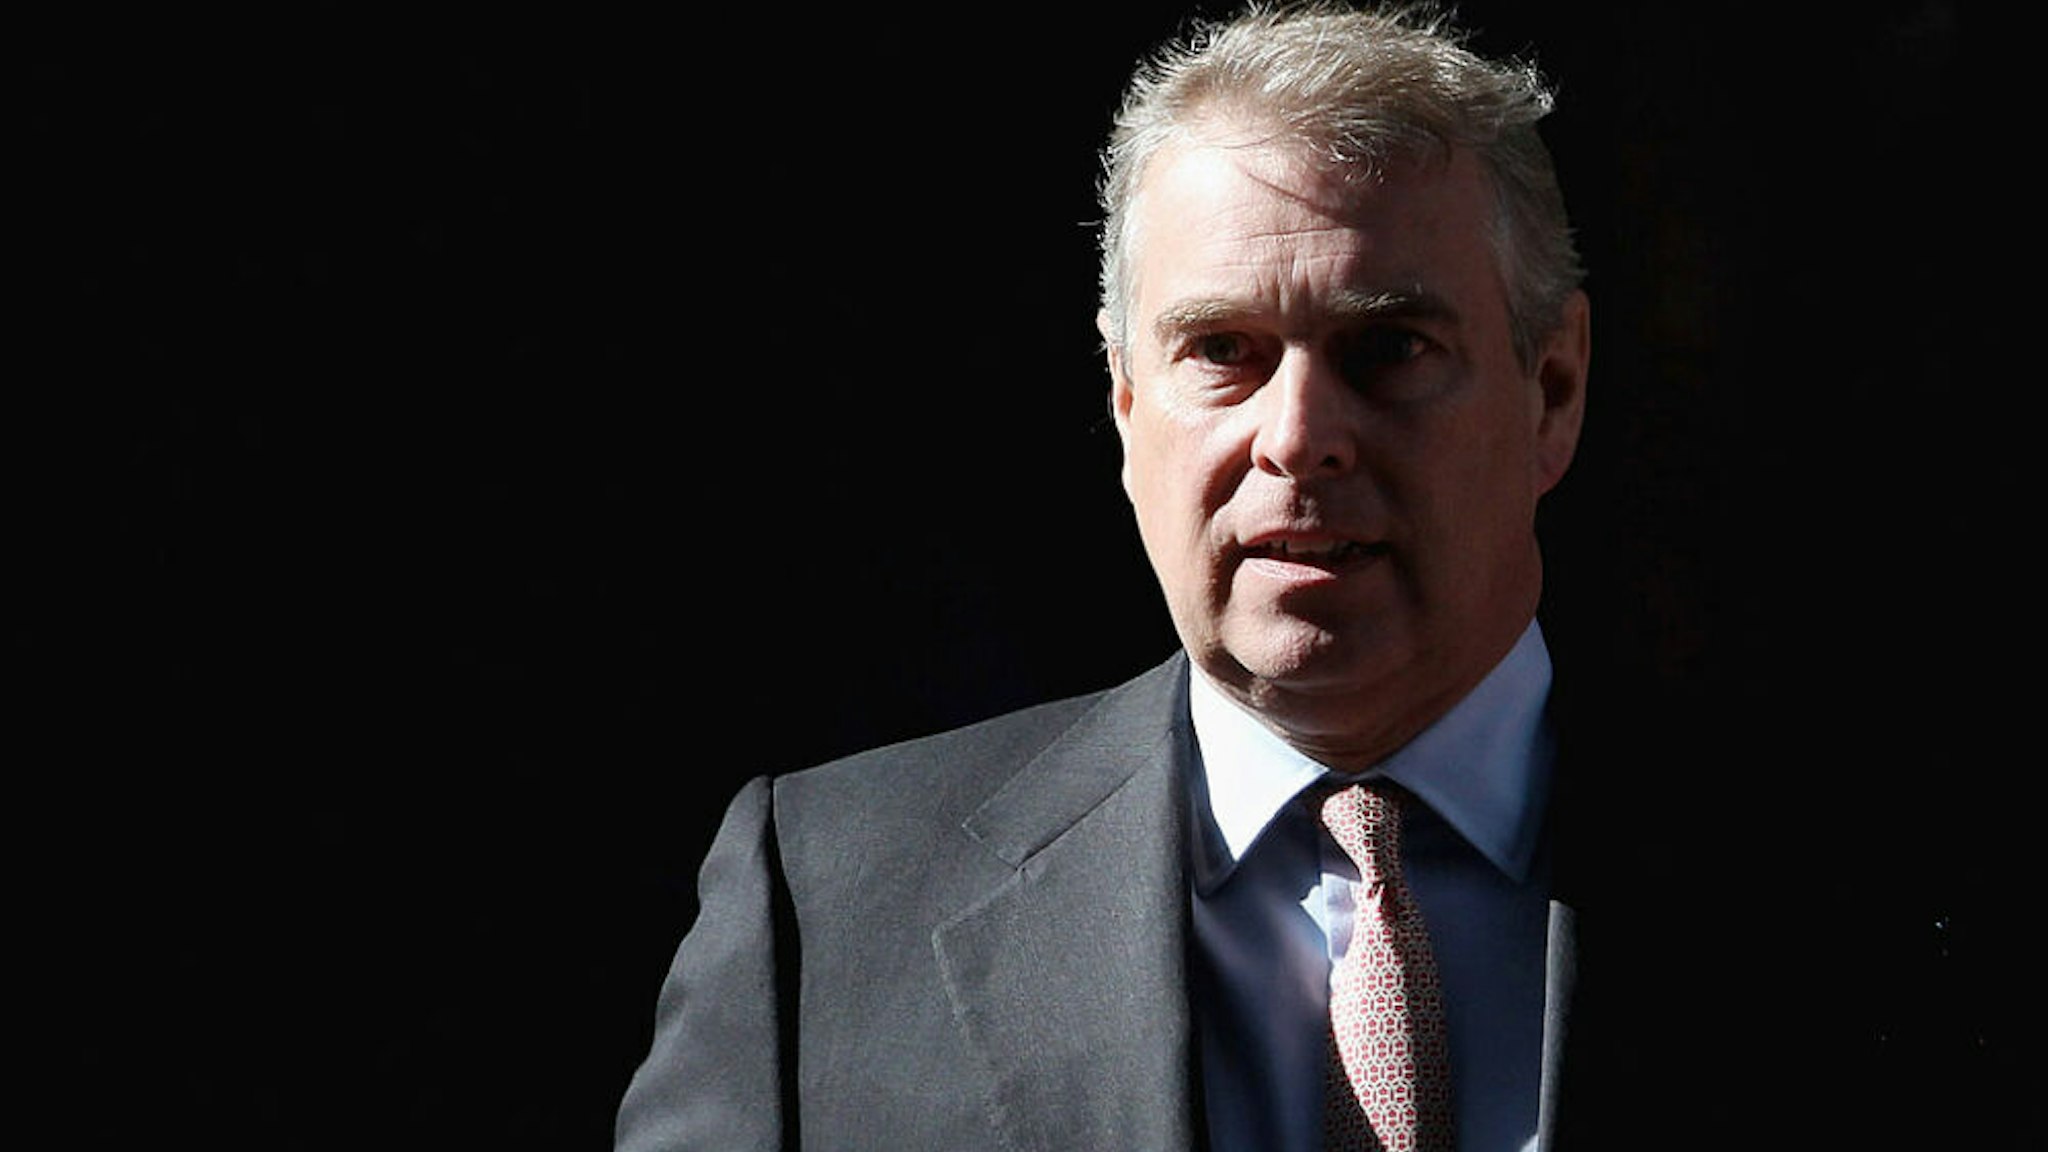 LONDON, ENGLAND - MARCH 07: Prince Andrew, Duke of York leaves the headquarters of Crossrail at Canary Wharf on March 7, 2011 in London, England. Prince Andrew is under increasing pressure after a series of damaging revelations about him surfaced, including criticism over his friendship with convicted sex offender Jeffrey Epstein, an American financier.